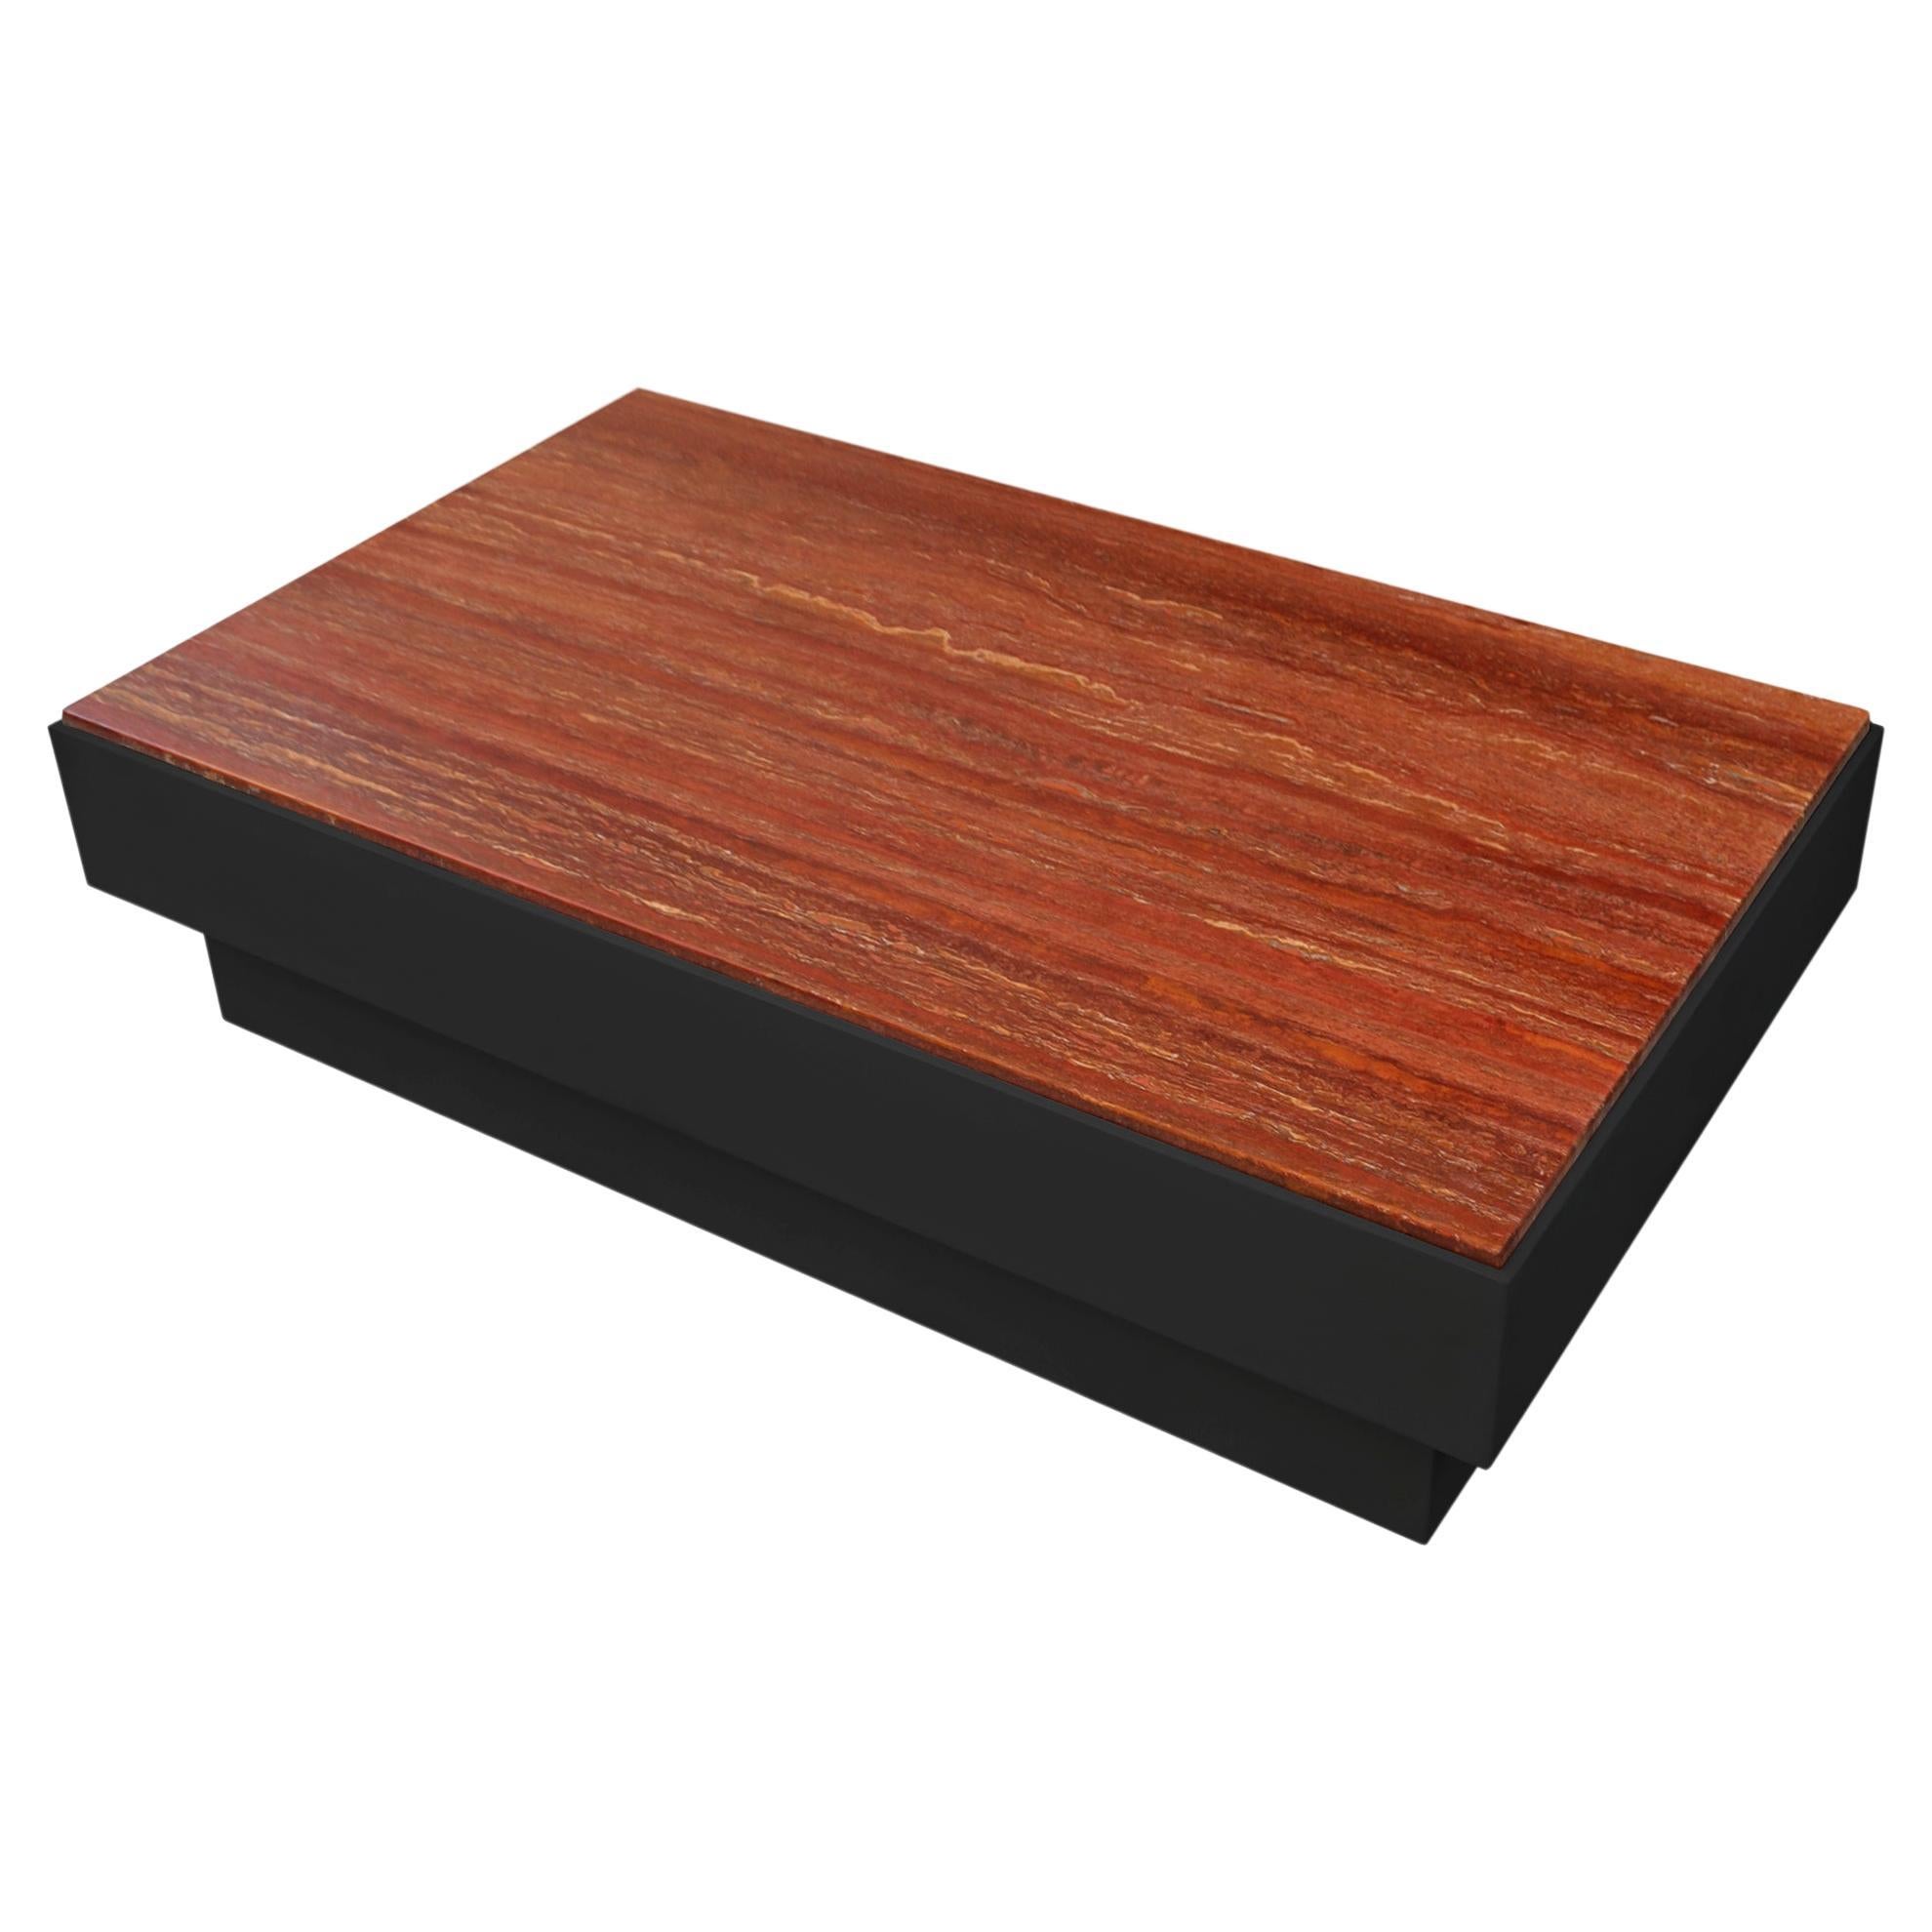 Coffee table red travertine and black wooden base handmade in Italy by Cupioli For Sale